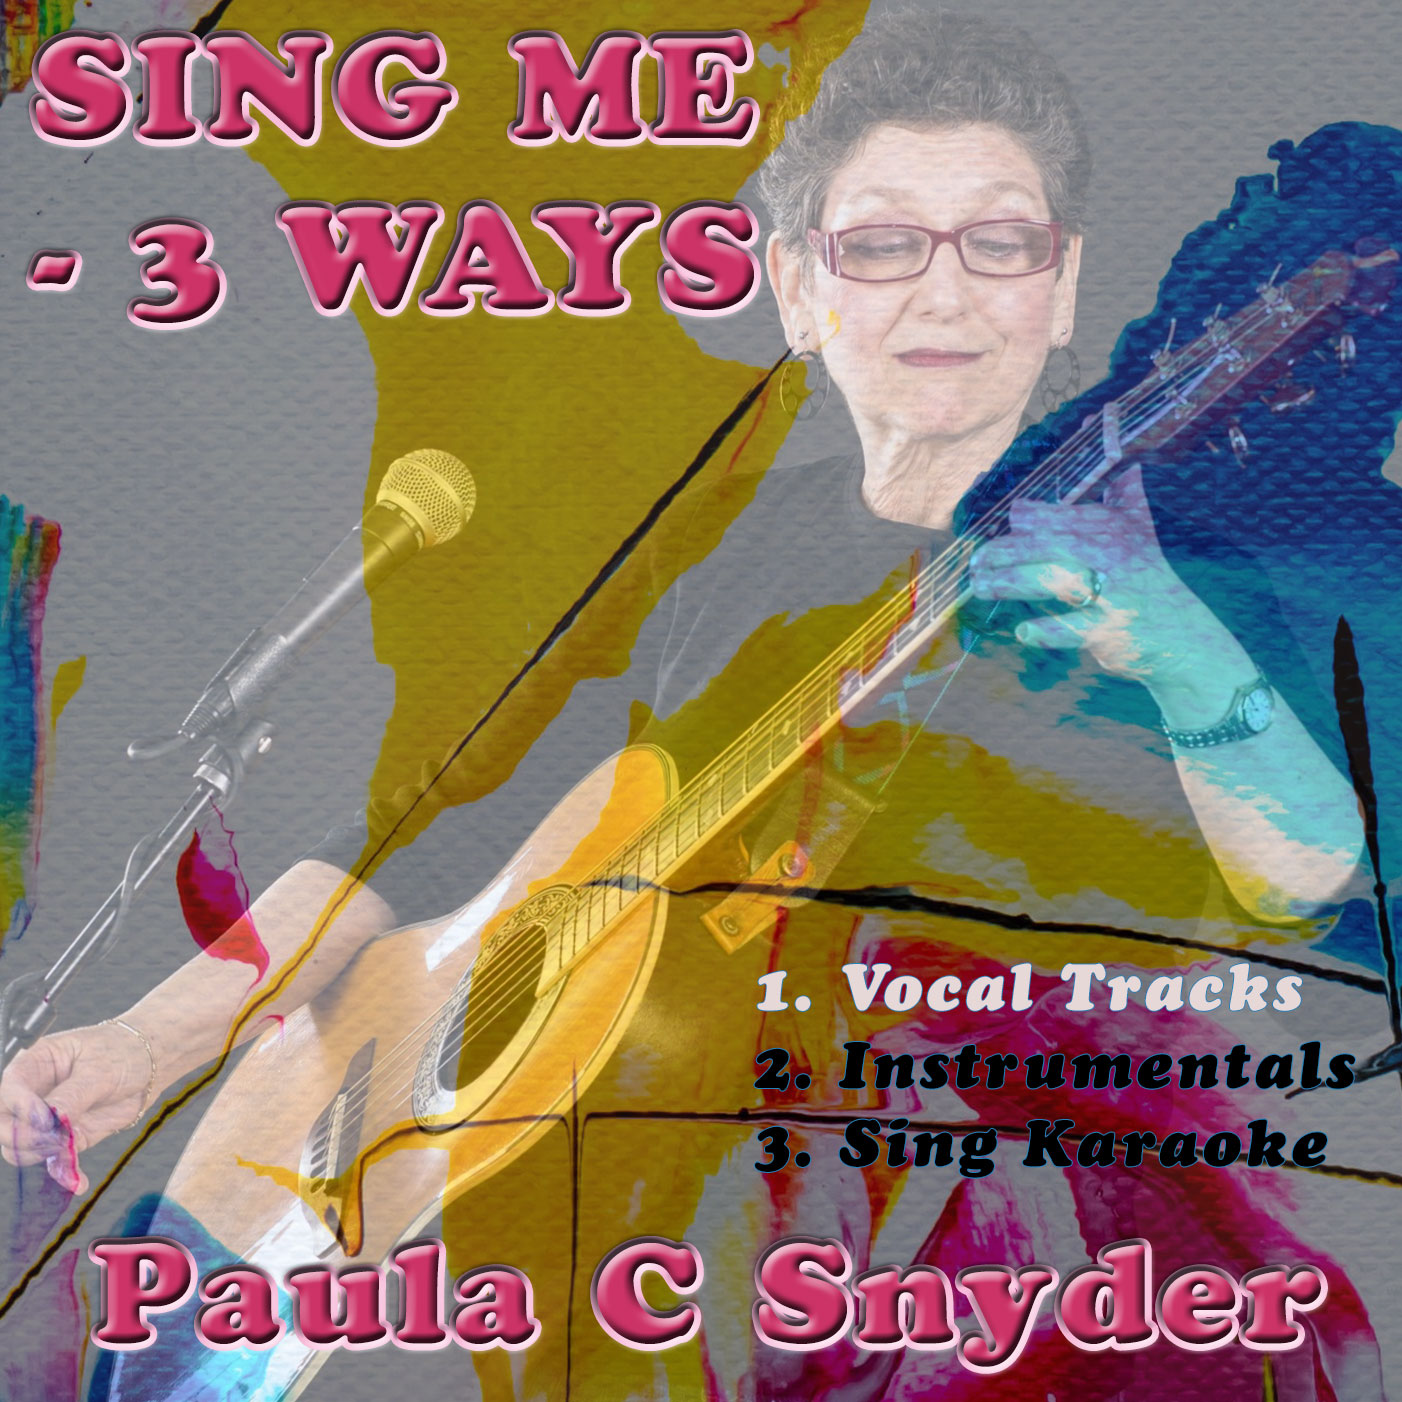 SING ME 3 WAYS COVER FRONT VOCAL SET3 13 23